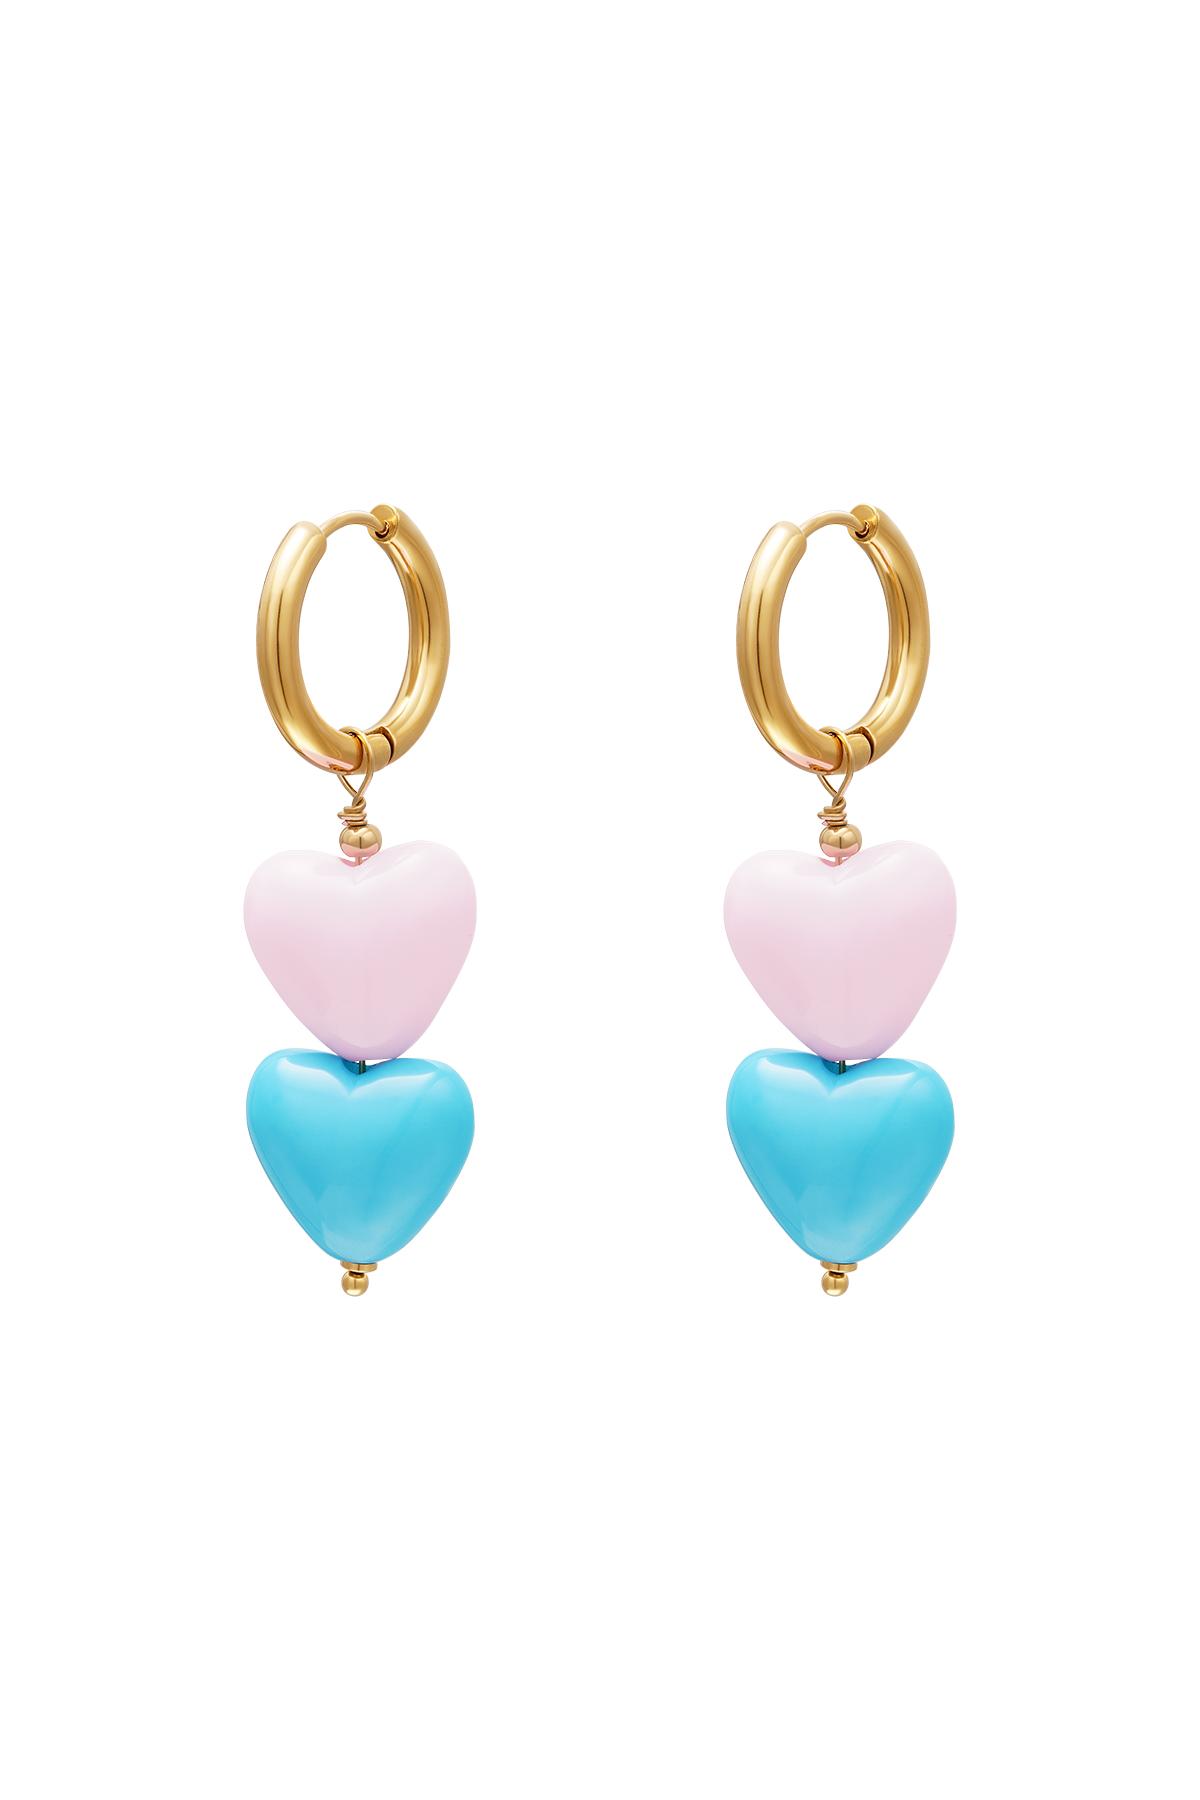 Colourful hearts earrings - #summergirls collection Blue &amp; Gold Stainless Steel